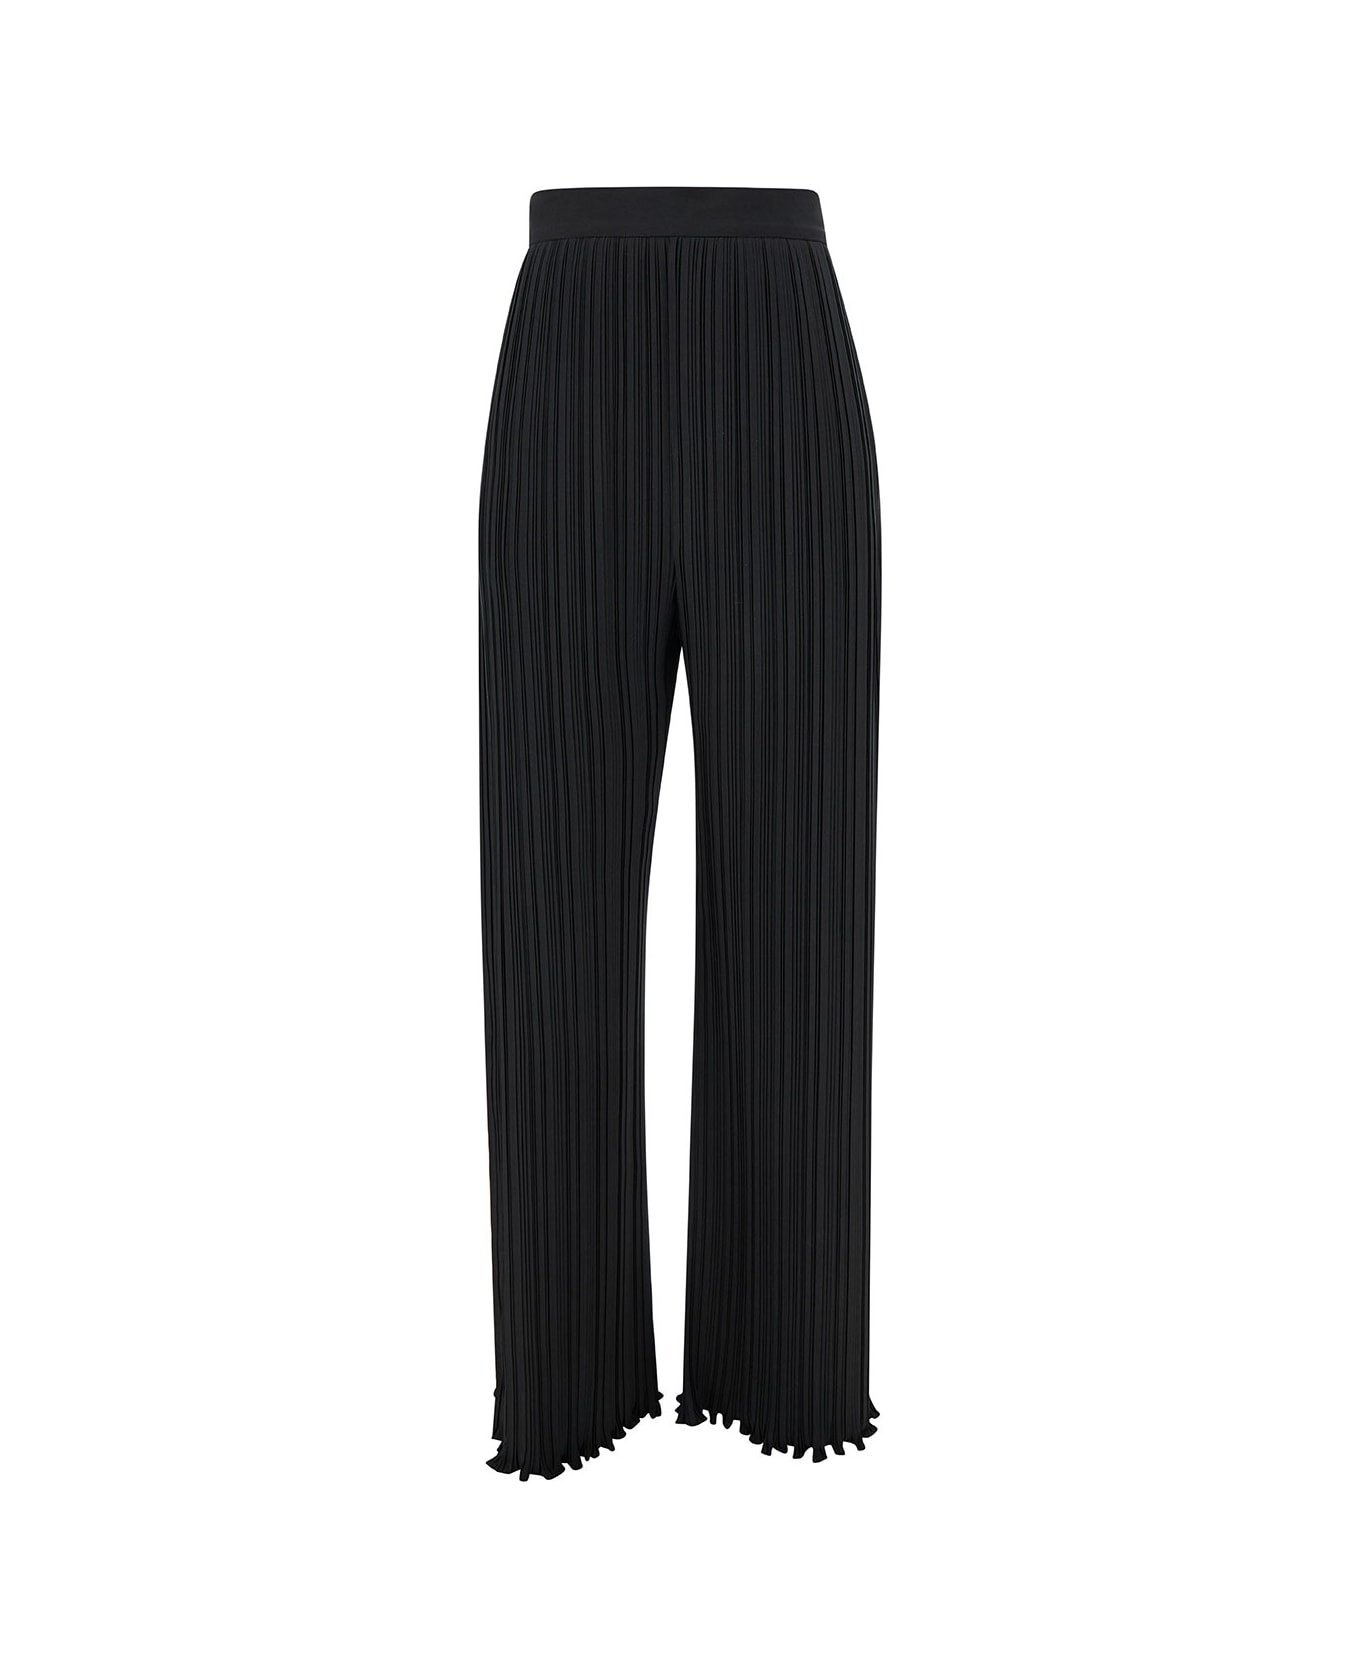 Lanvin Black Pleated Pants With Invisible Zip In Crêpe De Chine Woman - Black ボトムス